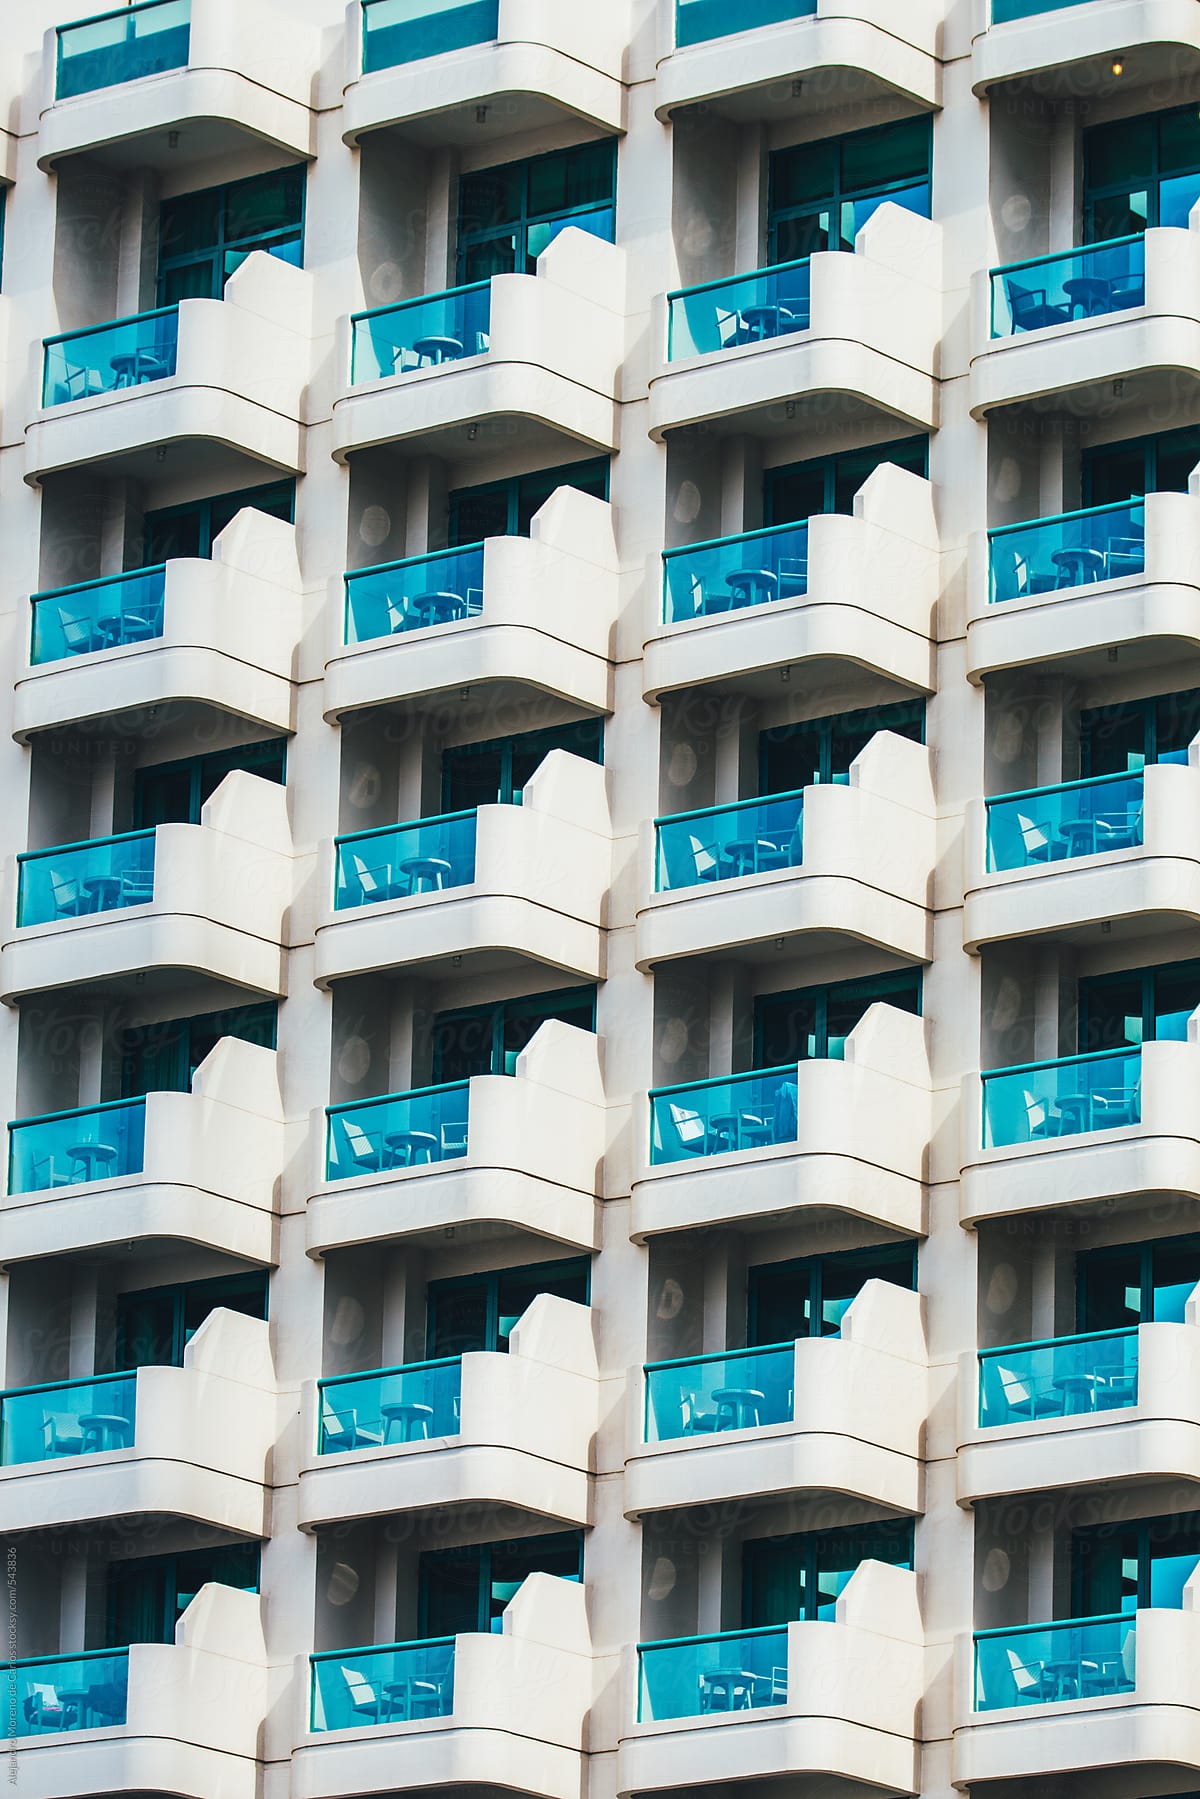 Balconies pattern in a beach apartment building